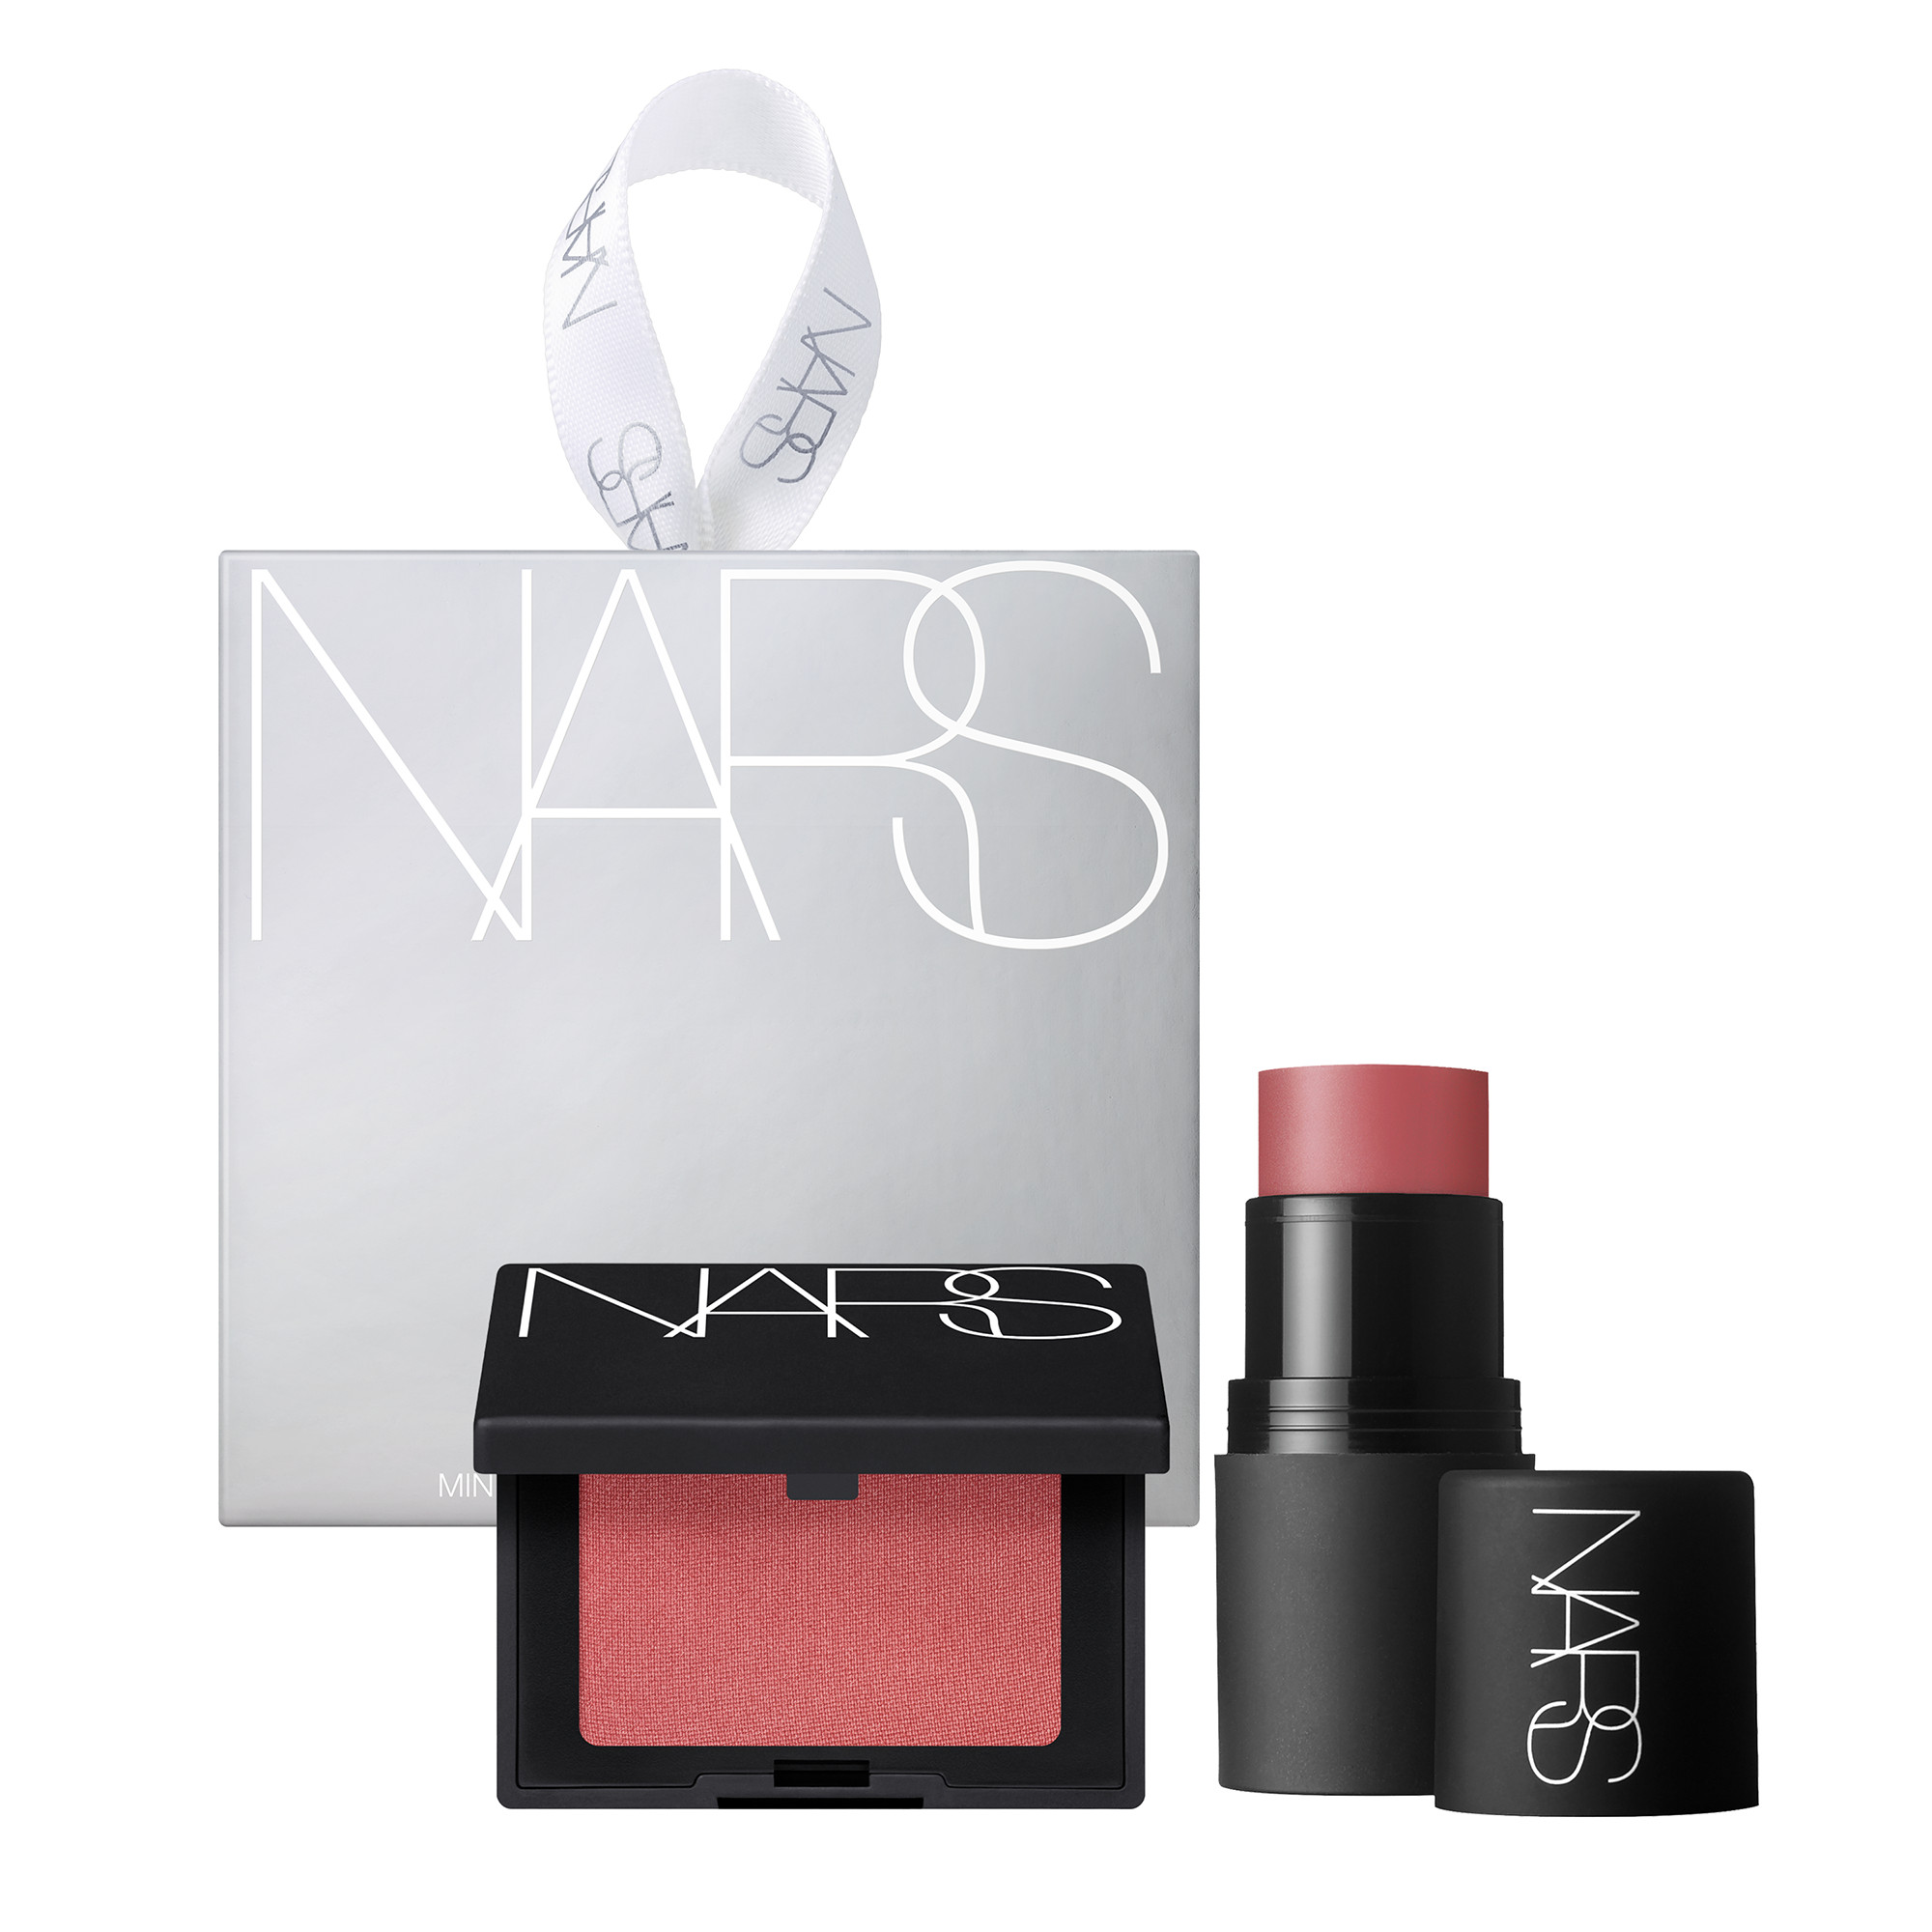 The NARS Blush in Exhibit A >>> use code Aniyah20 for 20% off NARS